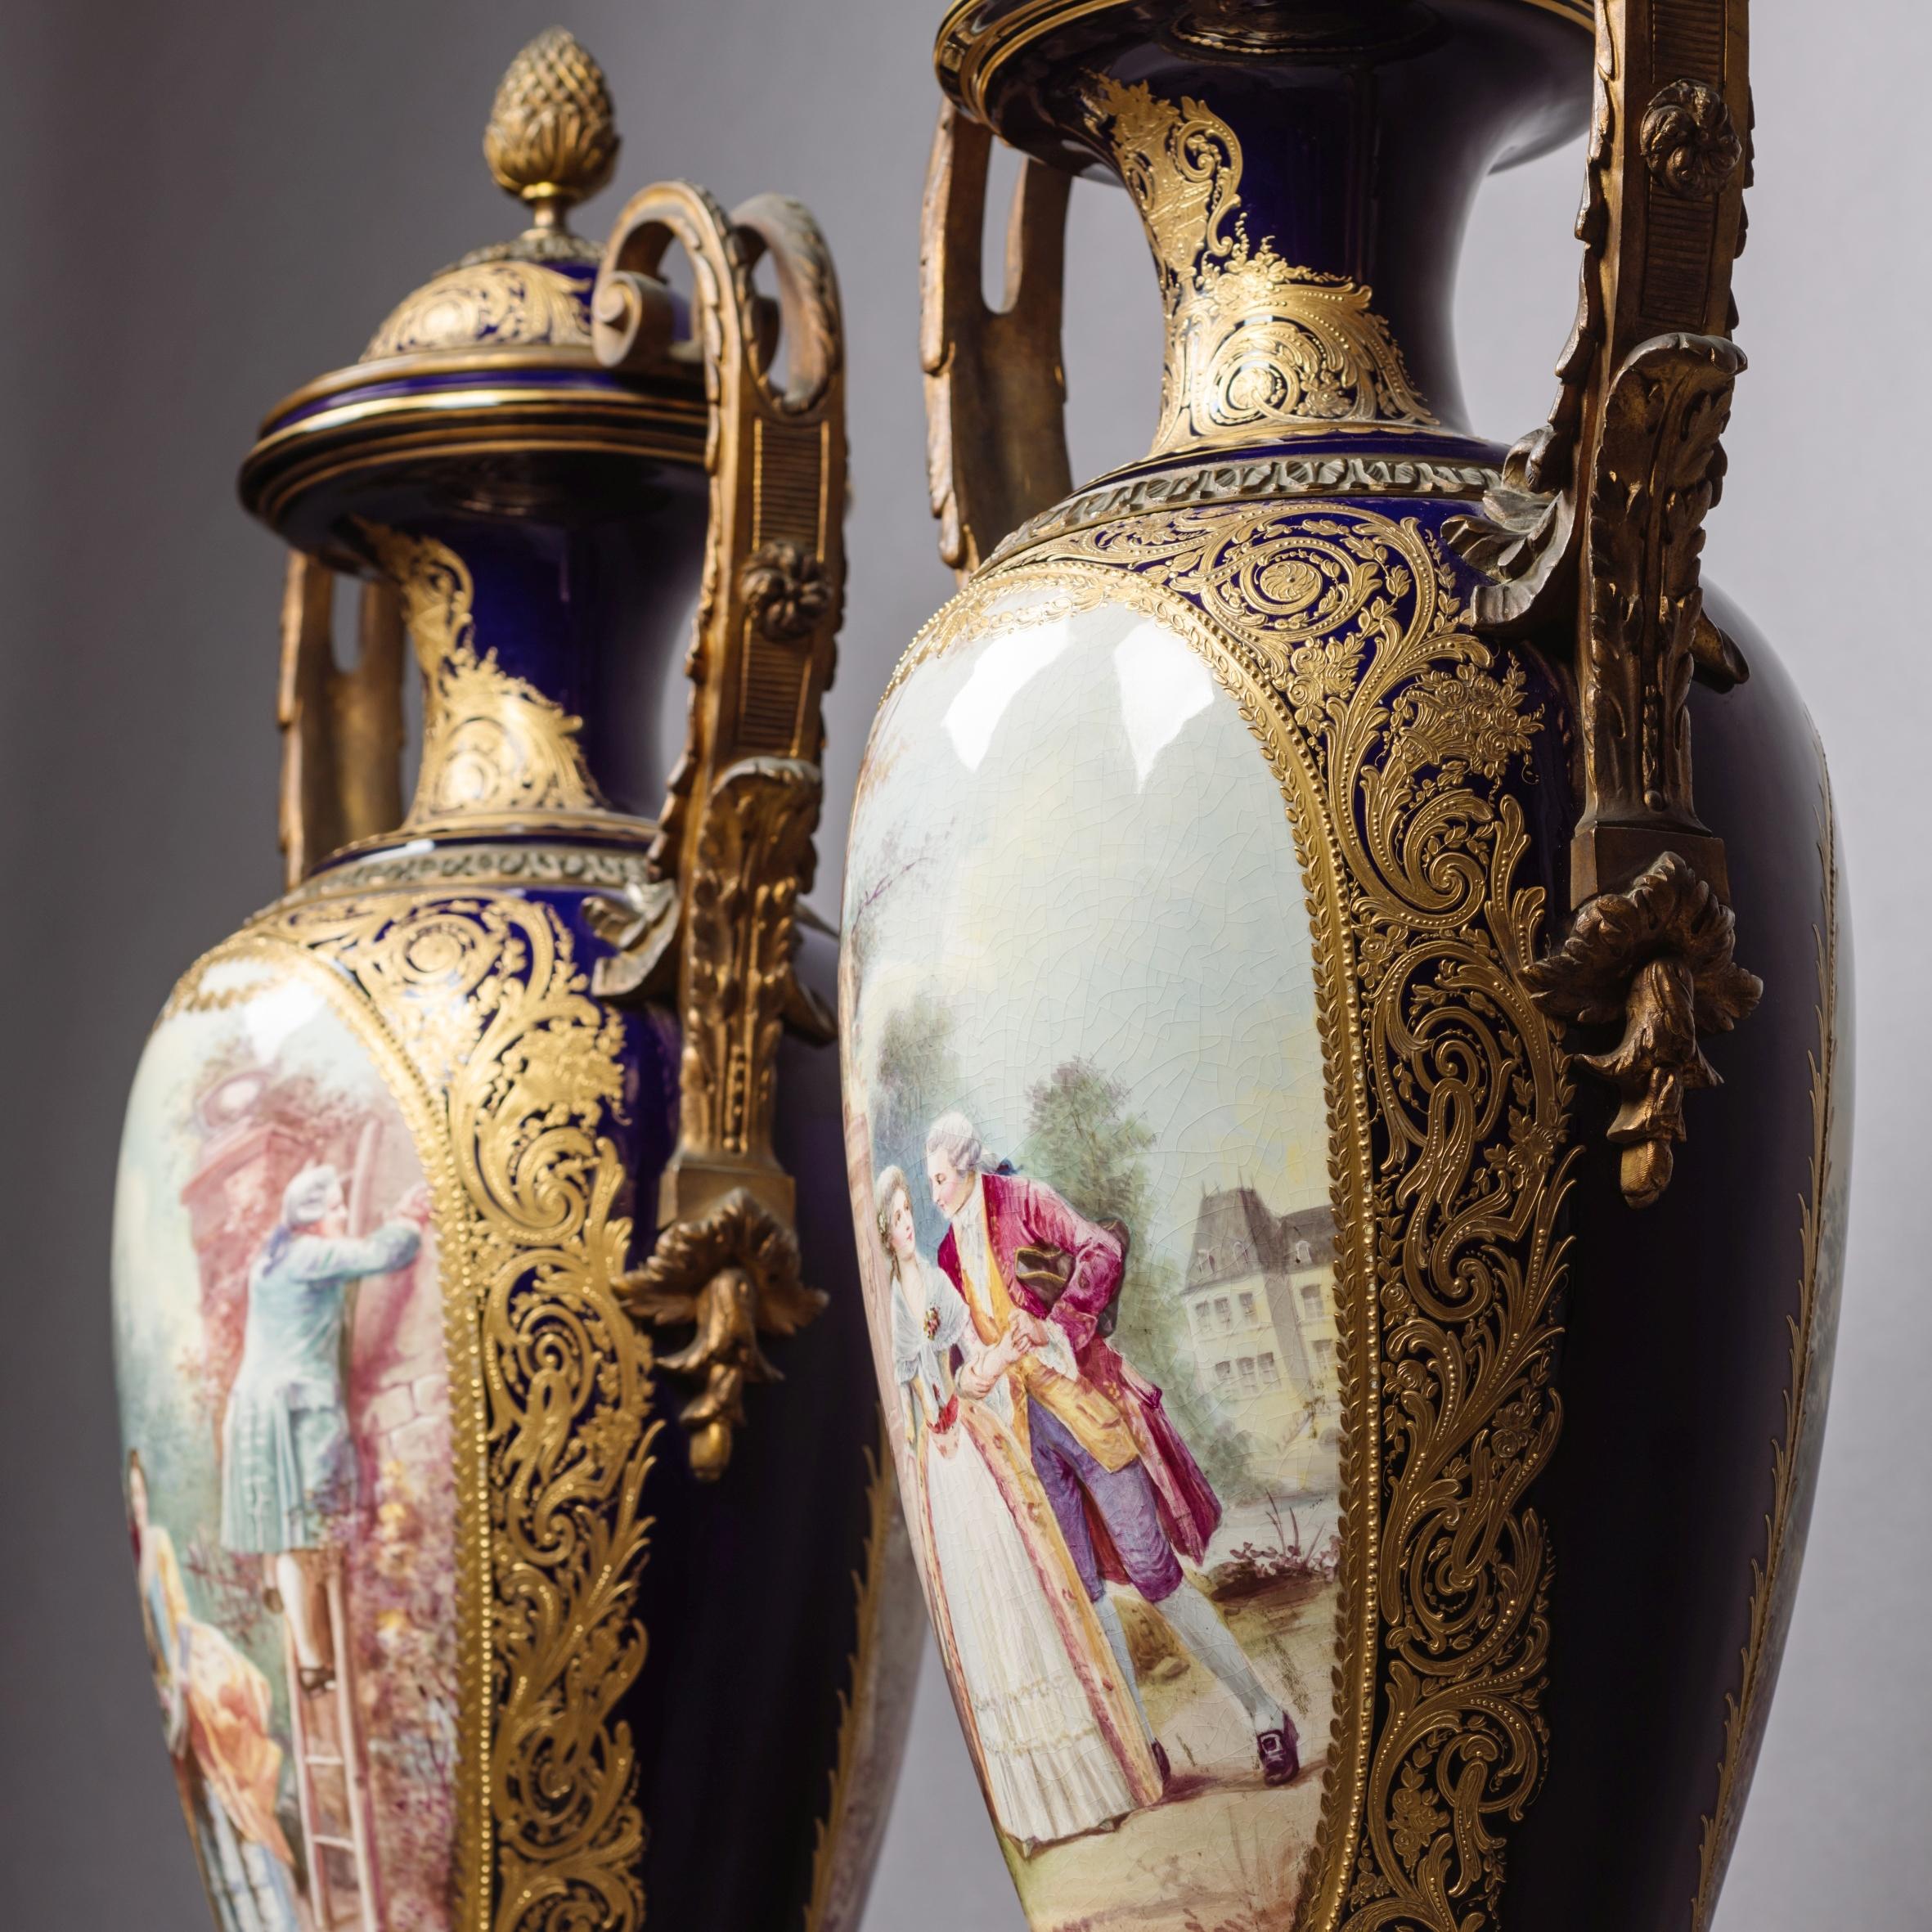 A fine pair of gilt-bronze mounted cobalt blue Sèvres style porcelain vases and covers.

Each vase is of amphora form with domed covers, scrolled handles and square section re-entrant gilt-bronze plinth bases. The body of each vase is of cobalt